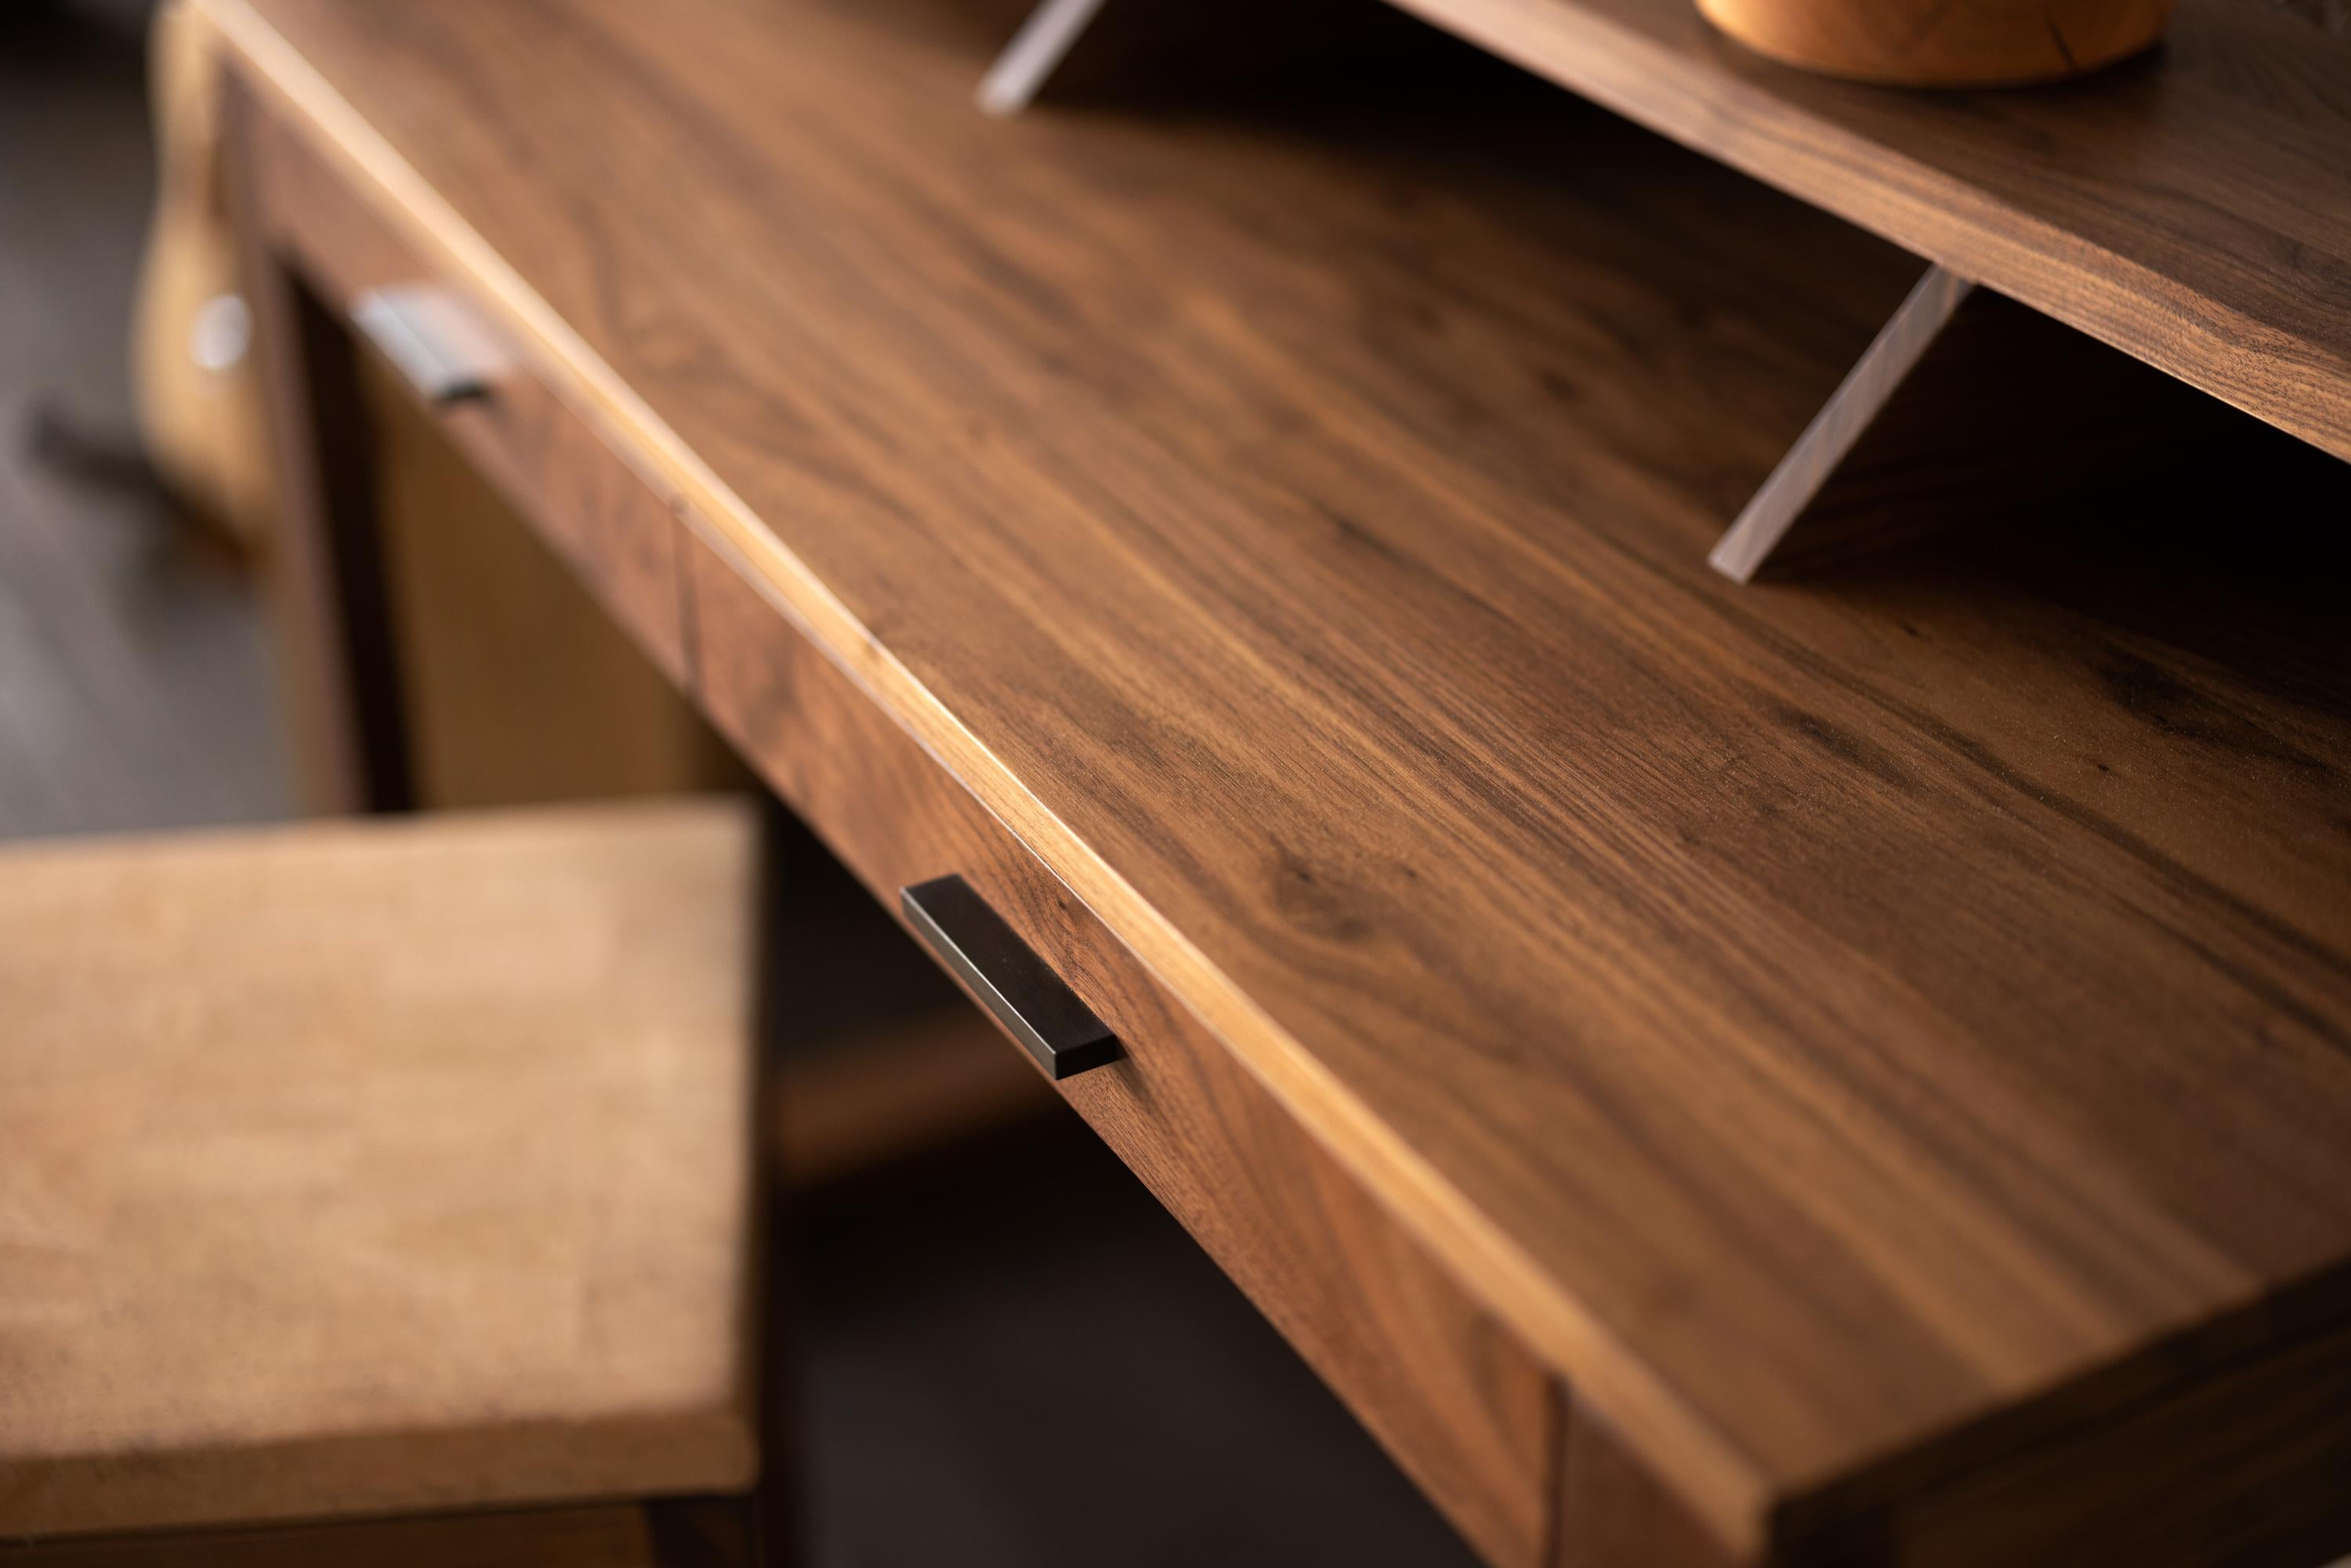 We handcrafted this classic writing desk with walnut hardwood from Birmingham's urban forest. For your home office, computer desk or a place to work from home, comfortable and focused on a novel or a grocery list. The writing desk offers a unique